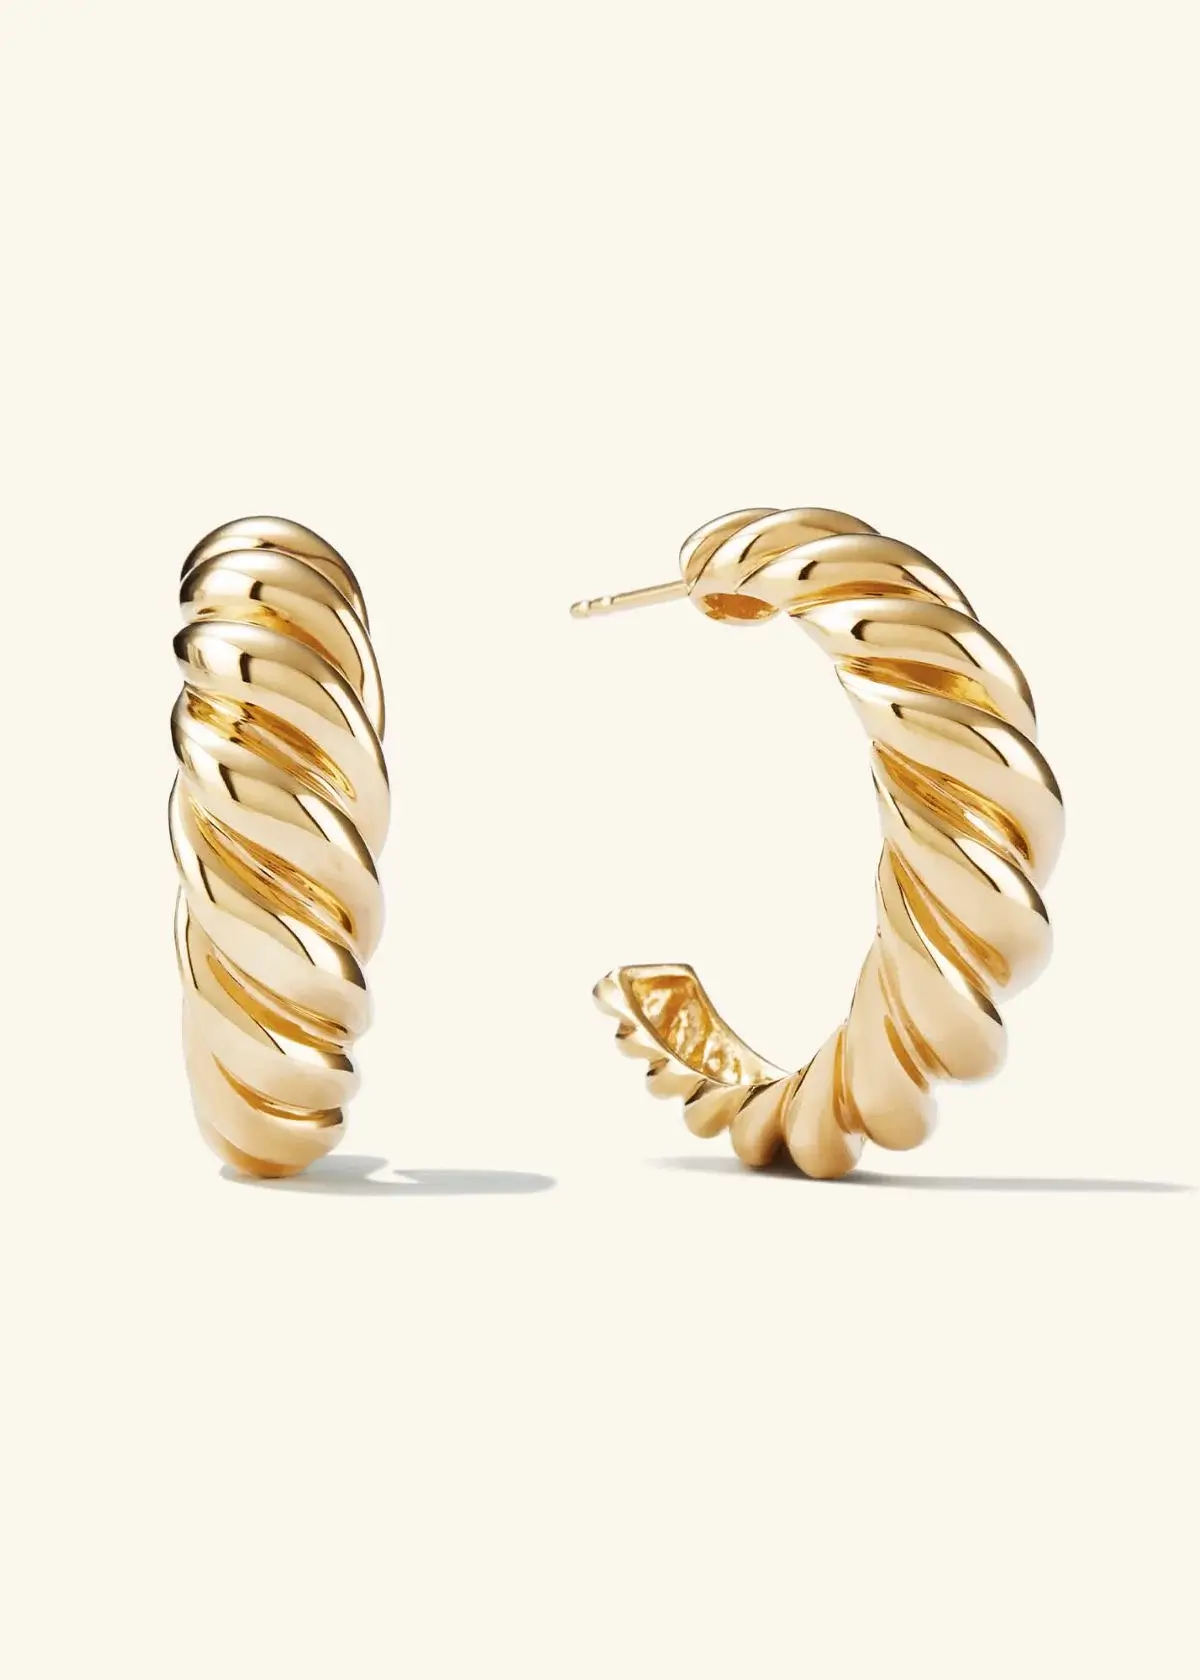 How to Choose the Right Croissant Earrings?